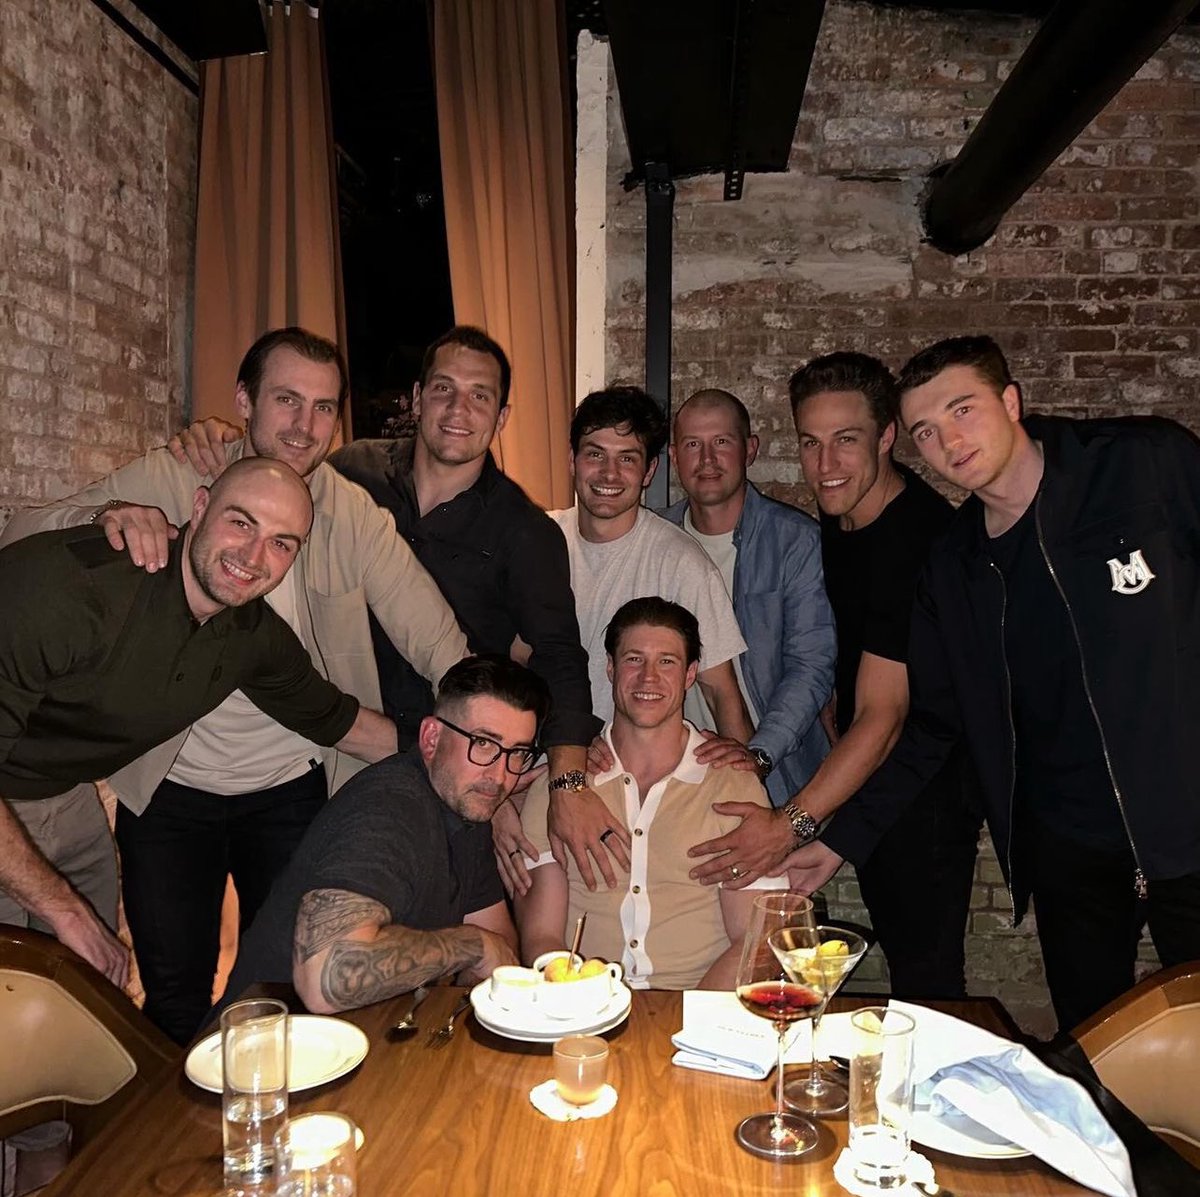 Some of the Isles out for the tank Matt Martin’s 35th birthday 🎂 Josh Bailey chillin with some of his homies. Josh will always be a New York Islander no matter what 👑

📸 Credits - @sydneyemartin 🐐 

#Islanders #Squad #Isles #MattMartin #Birthday #IslandersLive